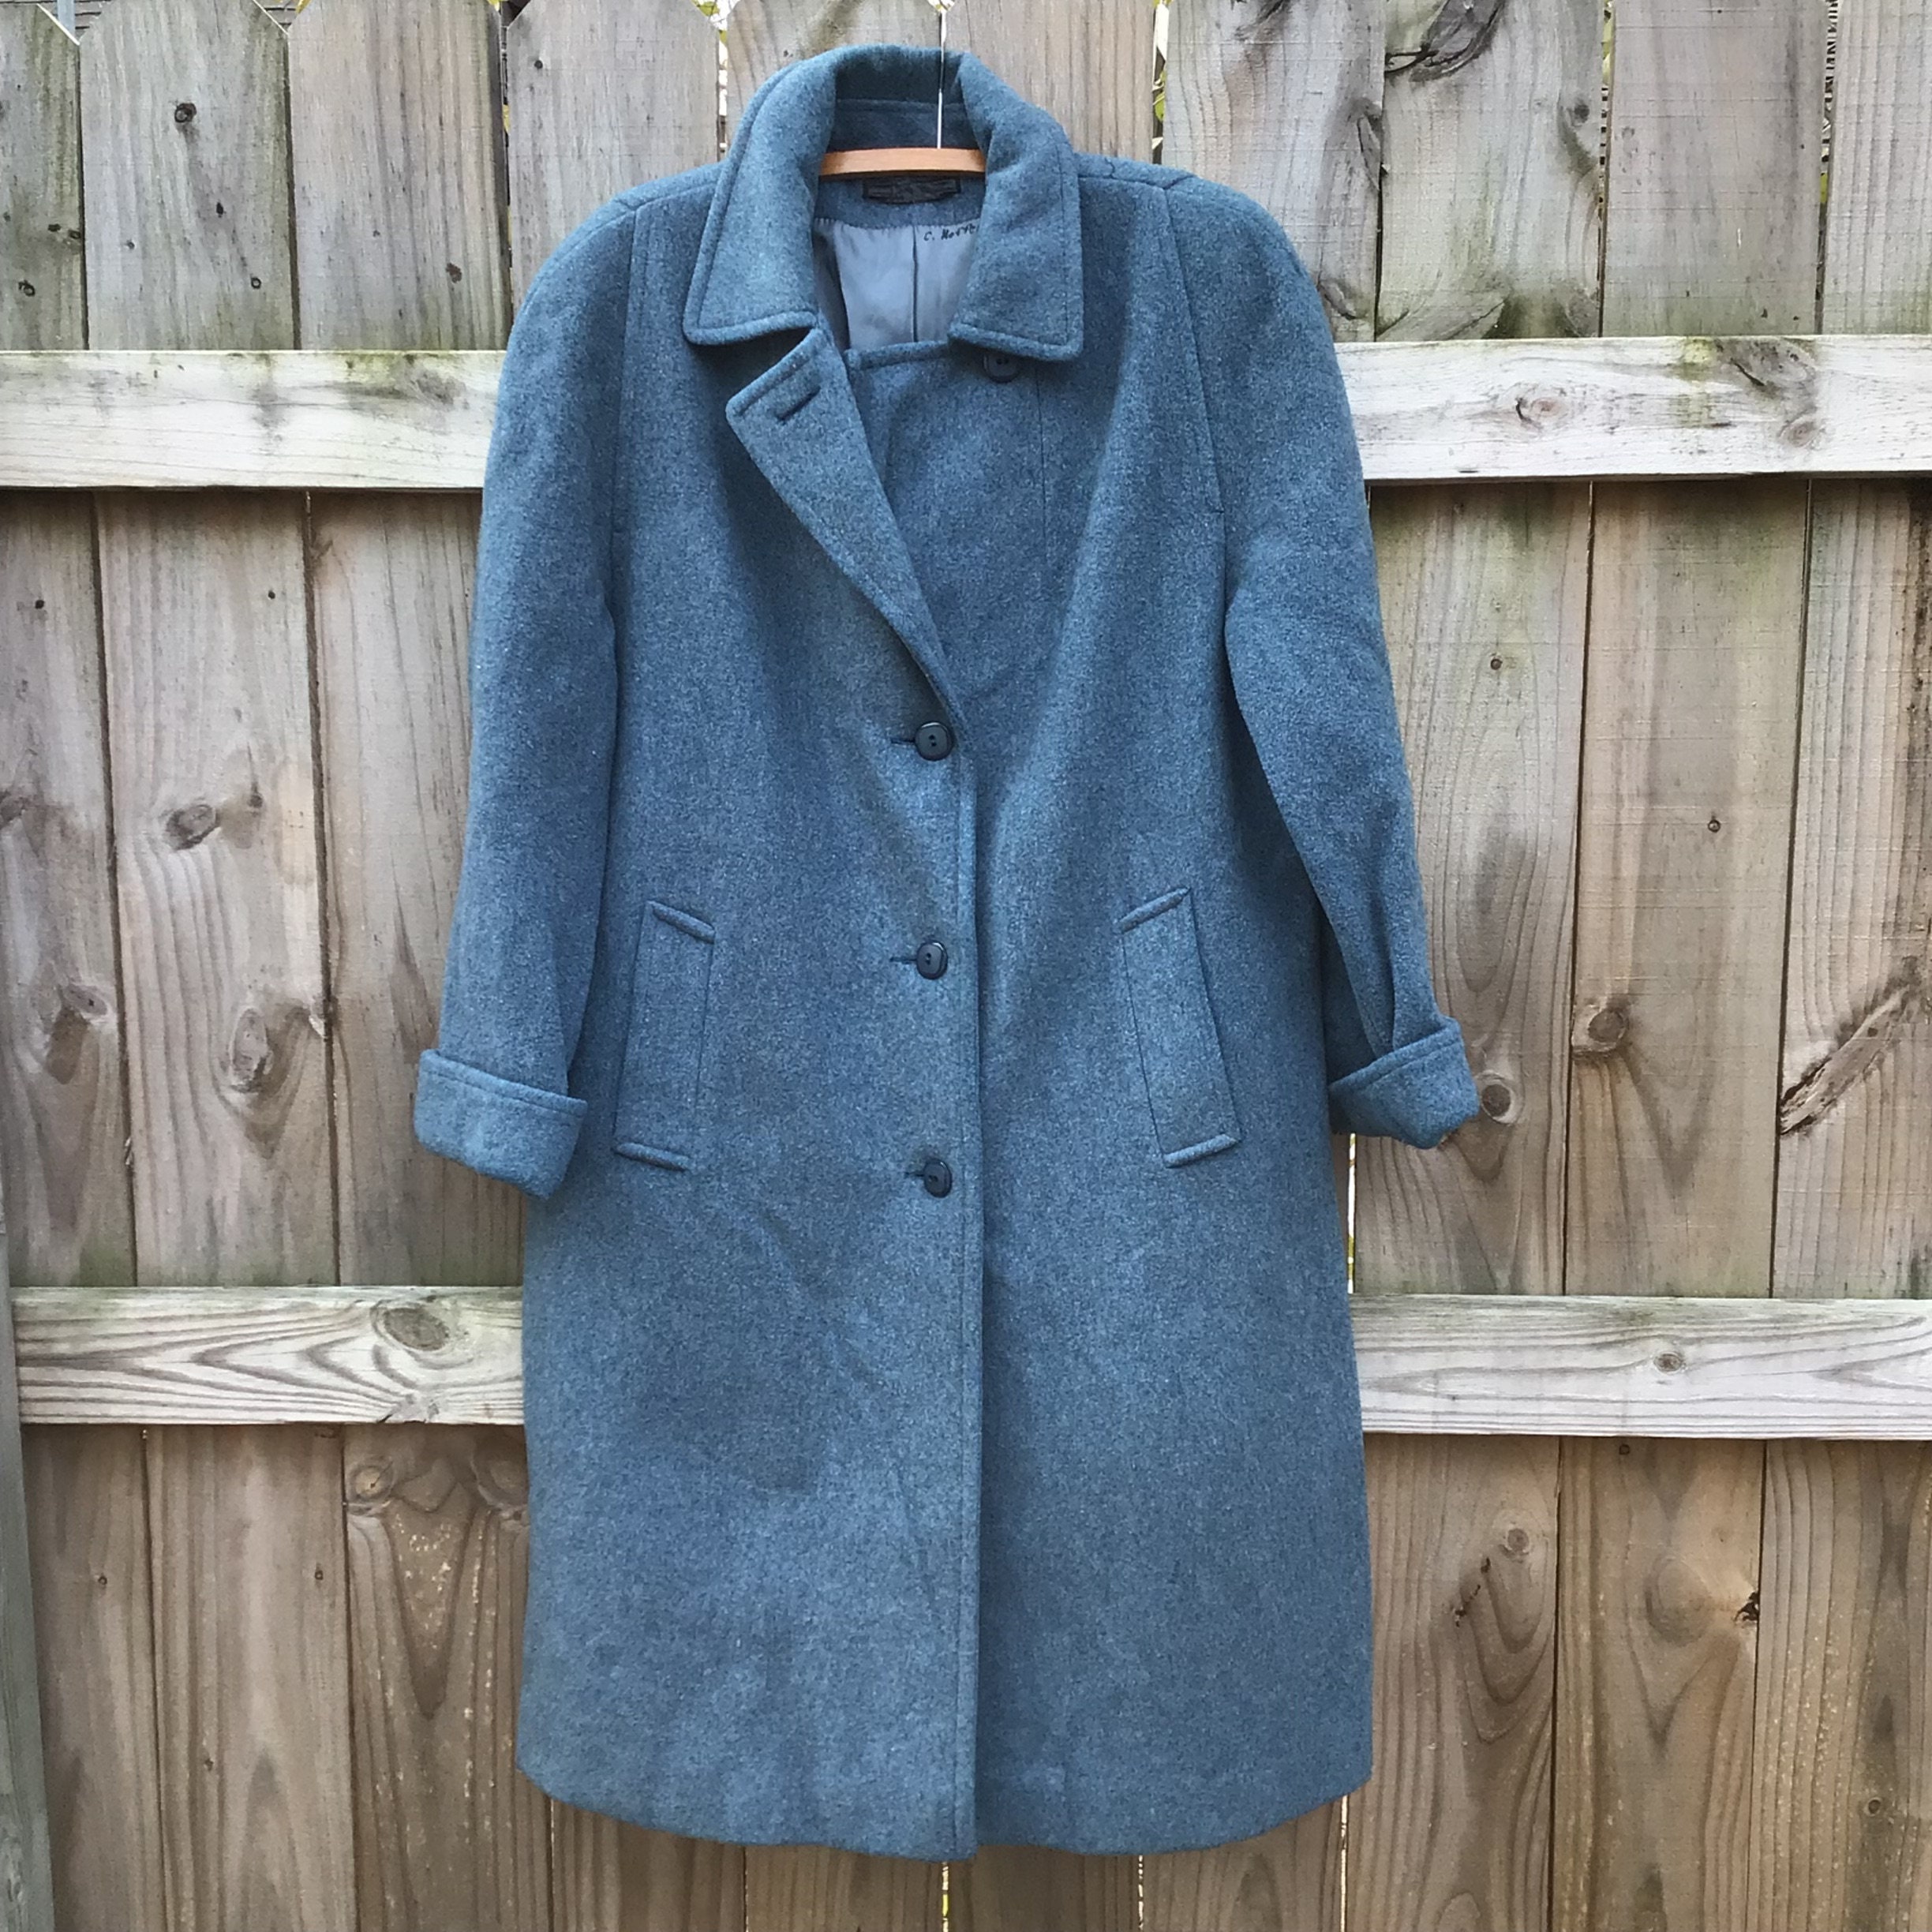 90's Puffy Blue Winter Coat Vintage Cold Weather Coat With Elbow